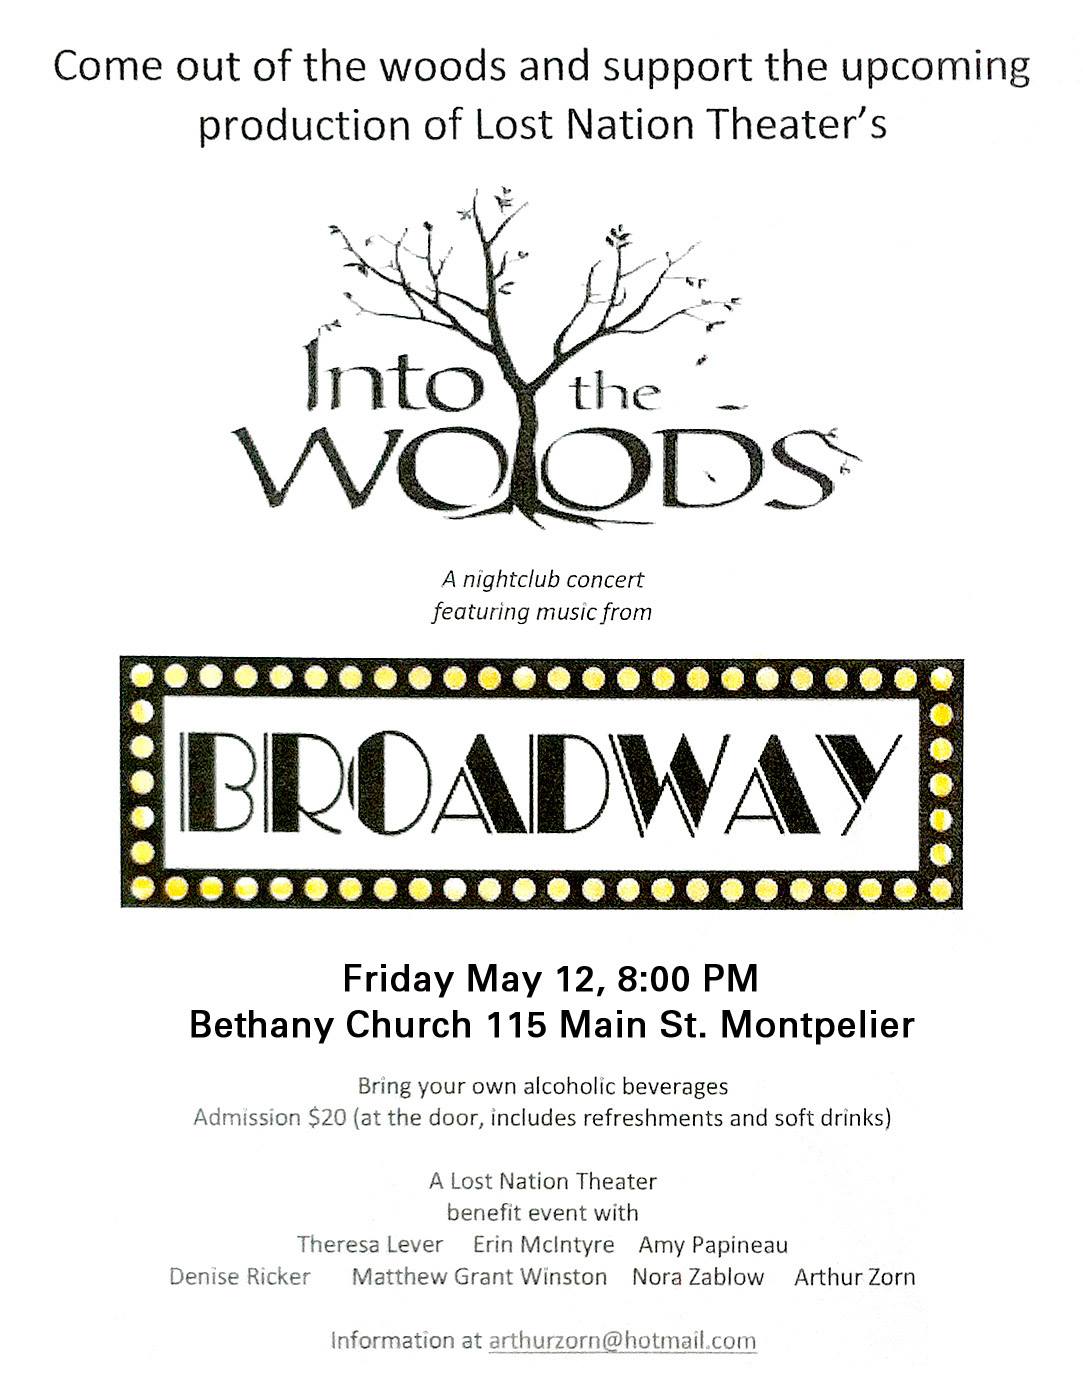 poster for the Broadway Cabaret, with Broadway in typical style lettering surrounded by Marquee lights. In black & white, also features a sketch of a tree growing out of "Into the Woods" show title